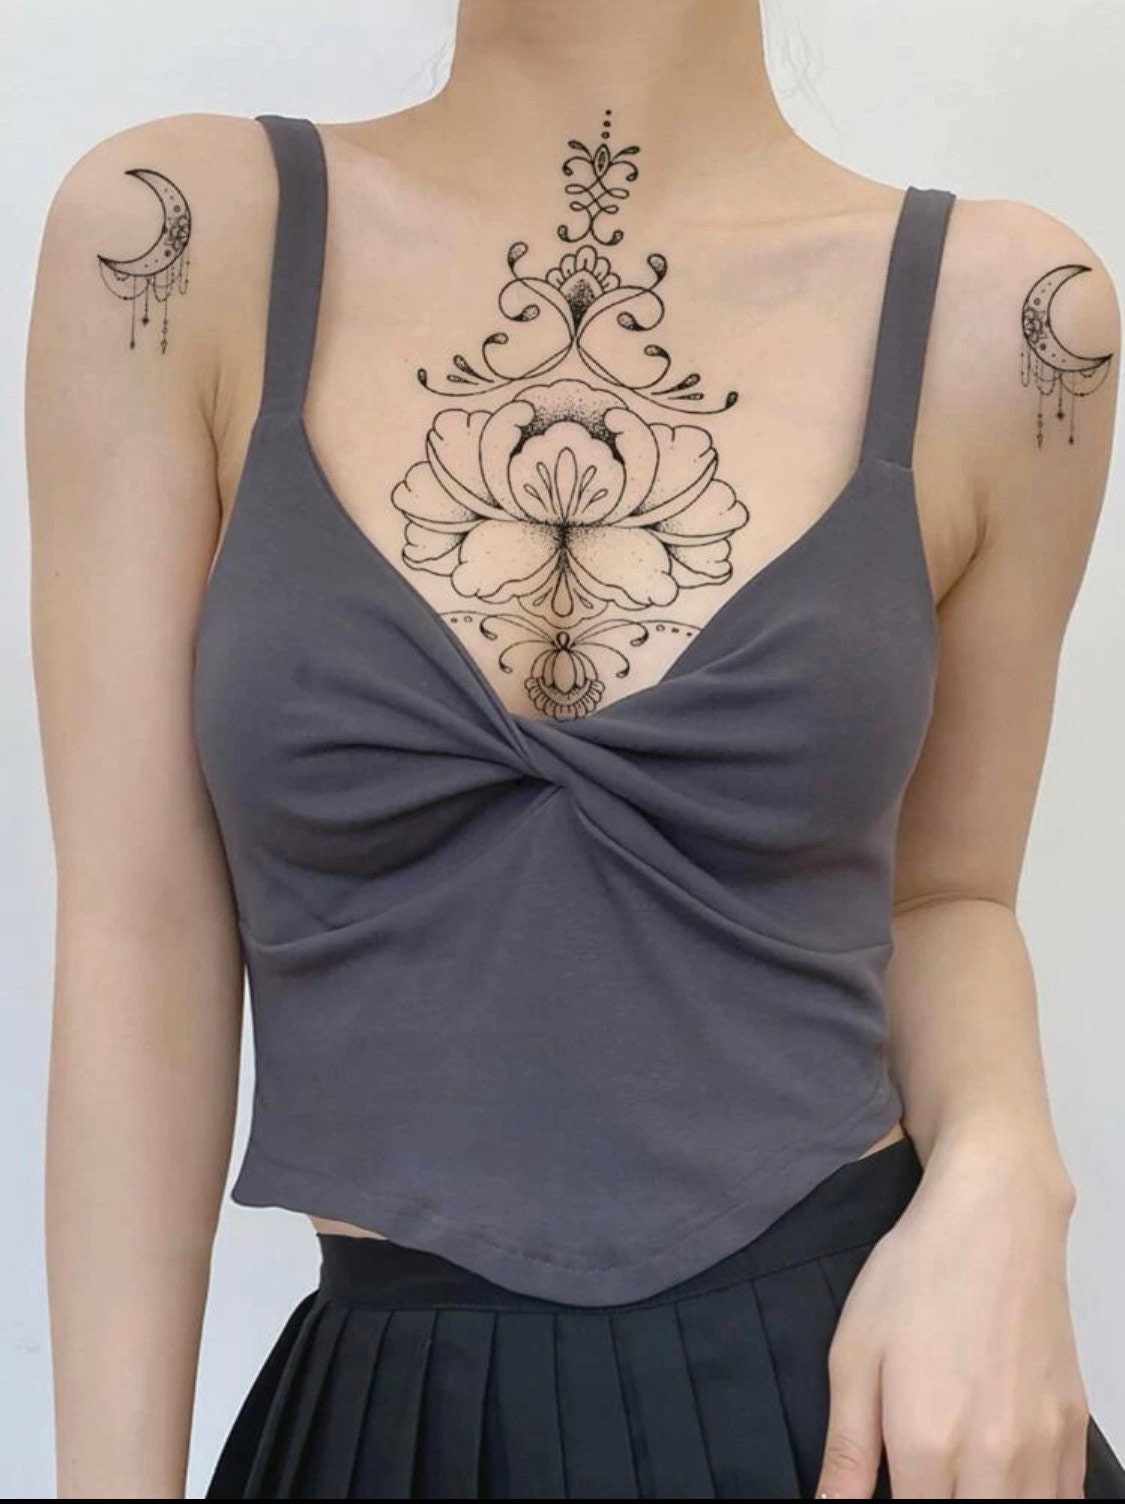 Floral Breast Tattoo - Etsy